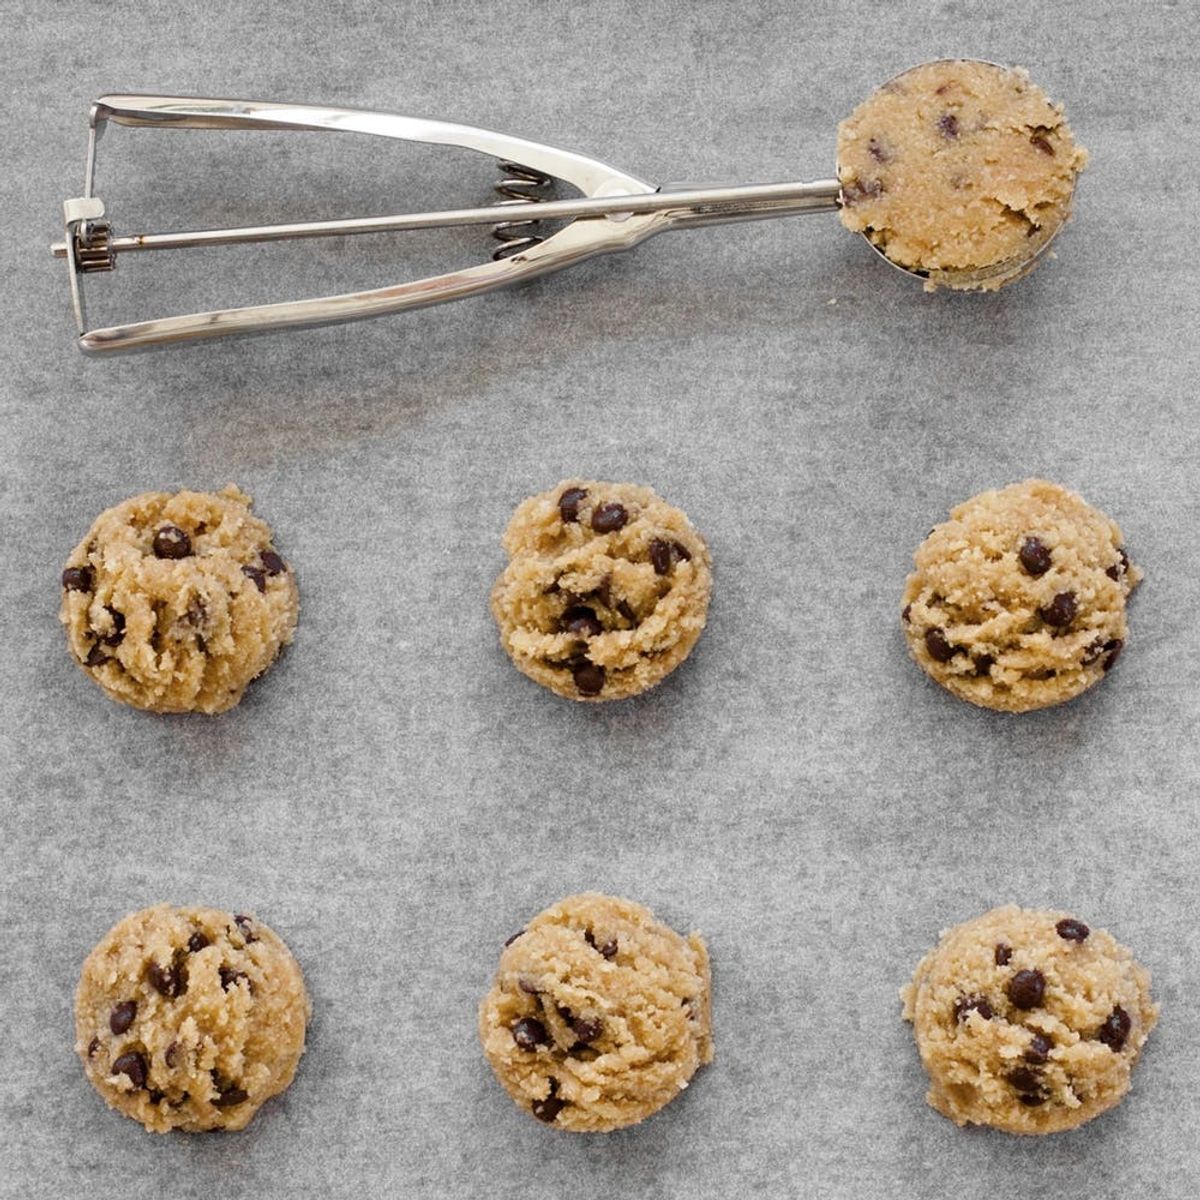 Other Surprising Foods (Besides Cookie Dough) That Could Be Contaminated With Bacteria